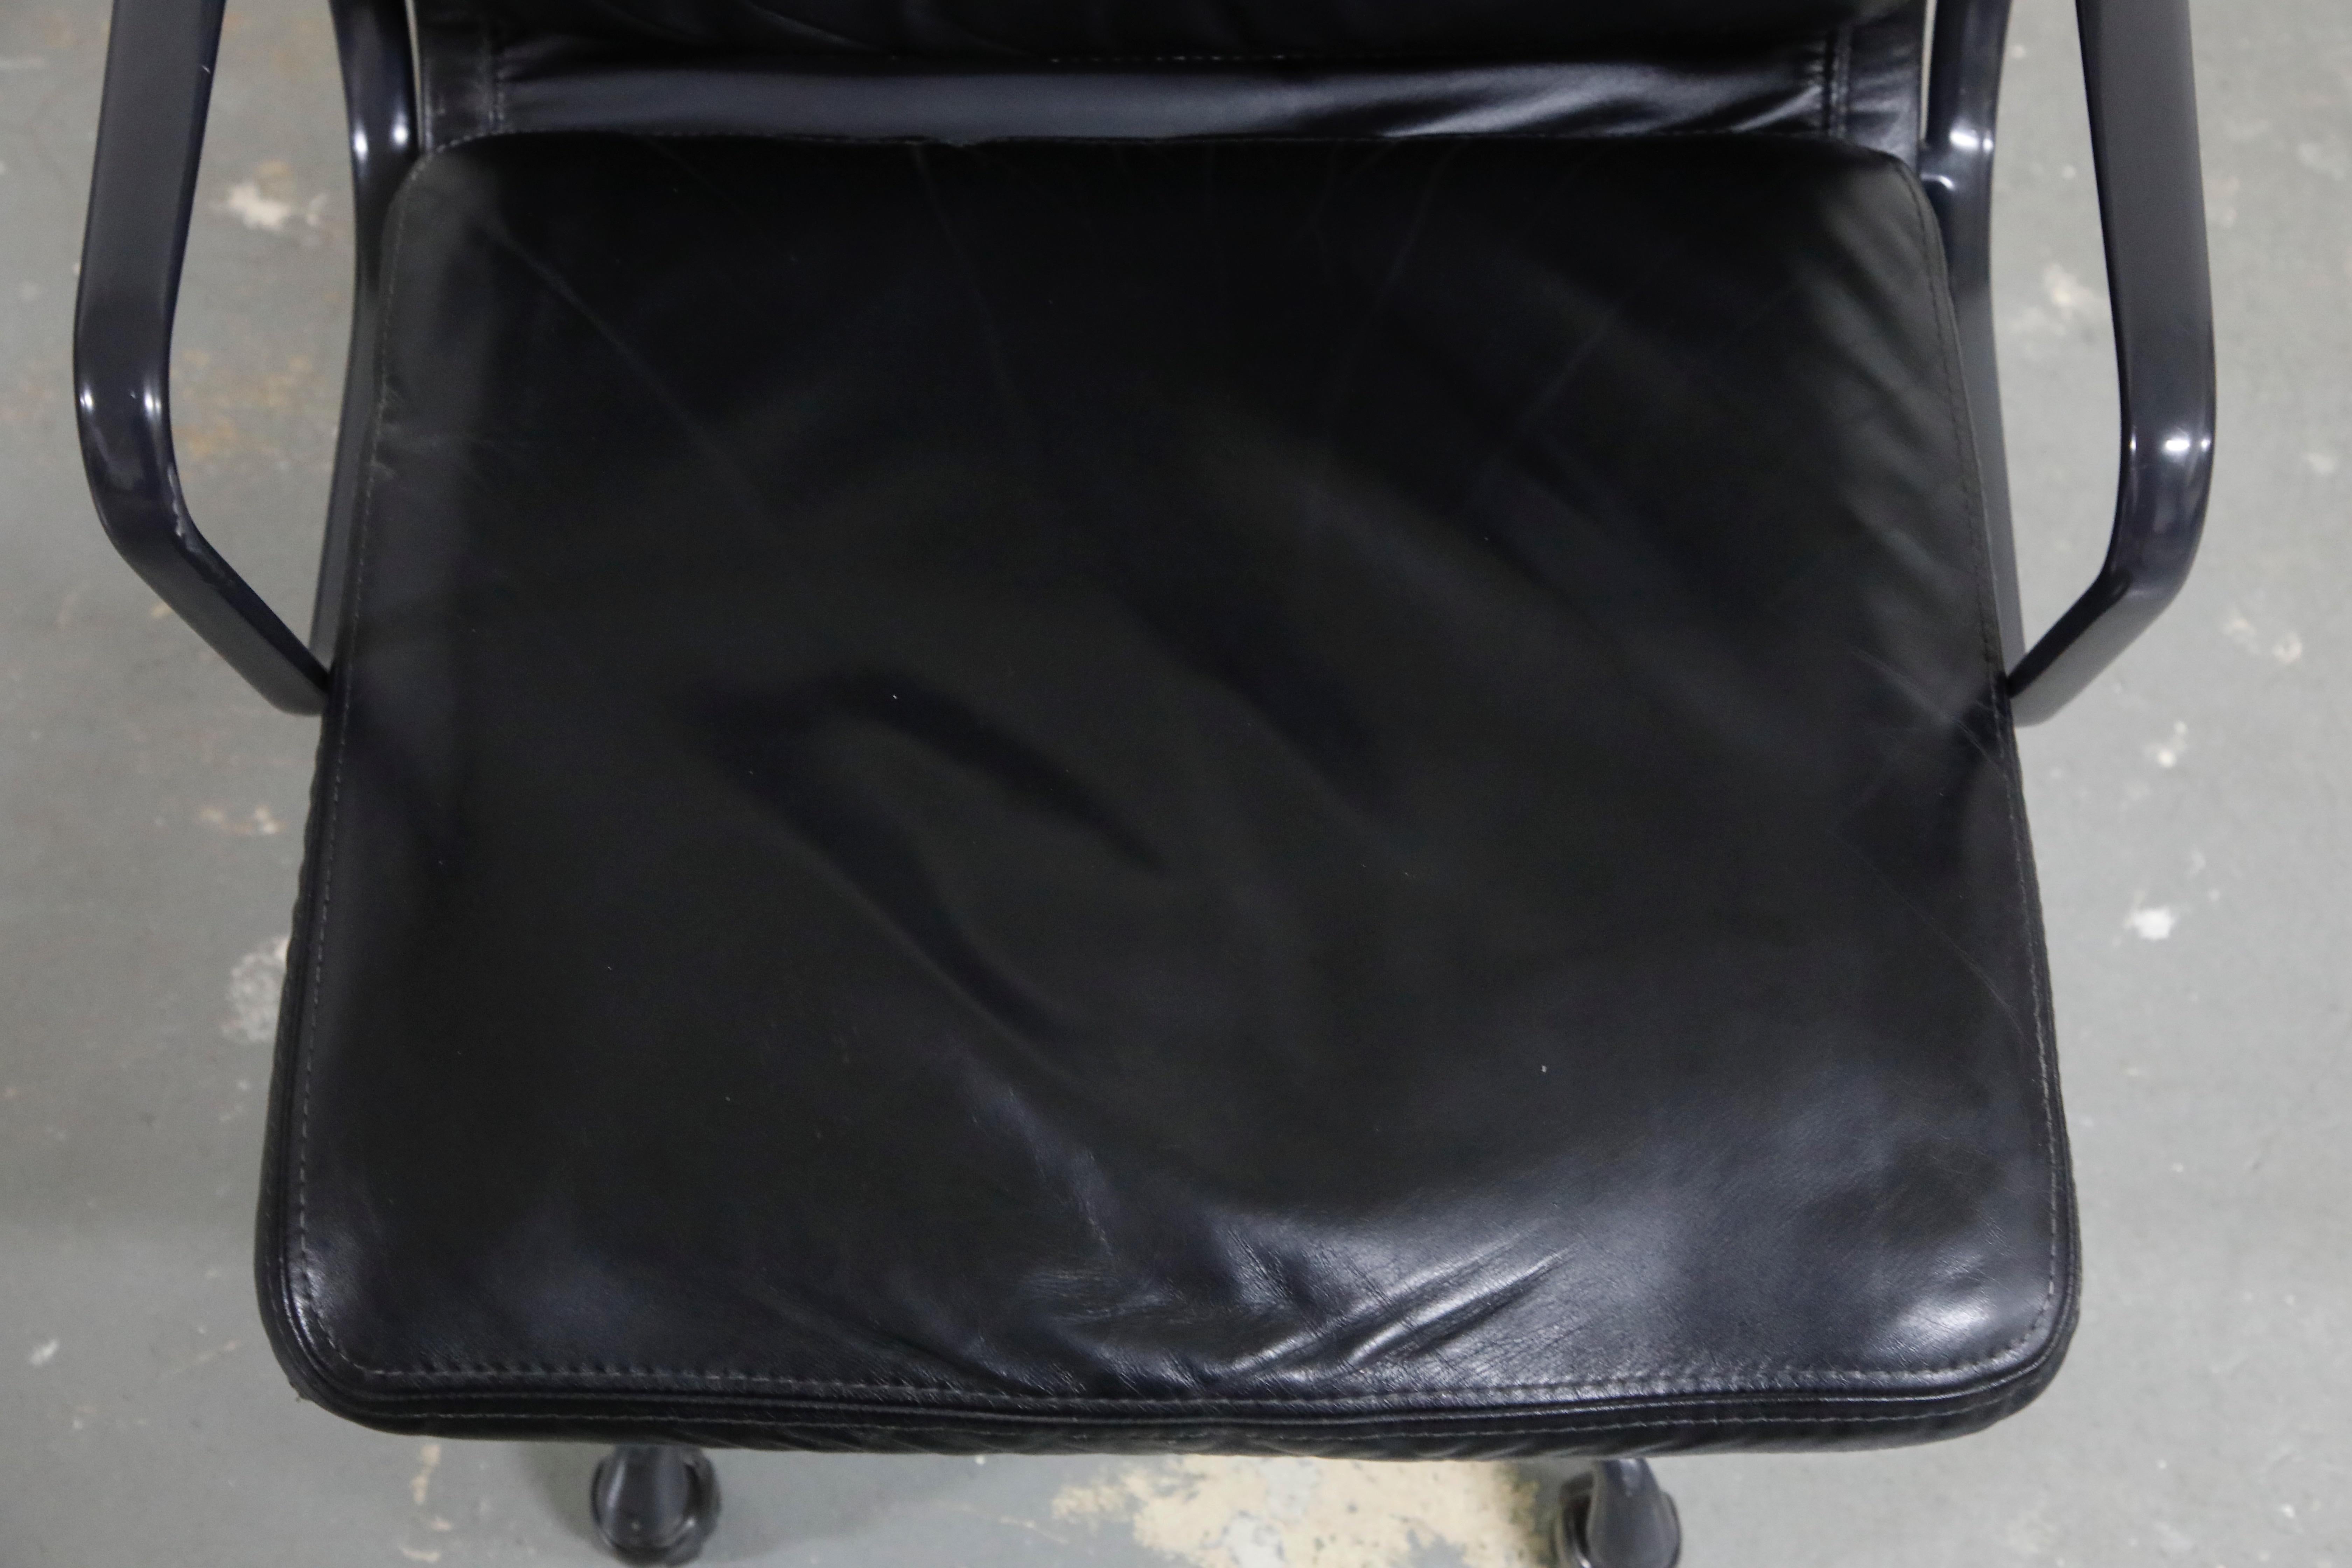 Aluminum Rare Black on Black Eames Soft Pad Management Chair by Herman Miller, 1988